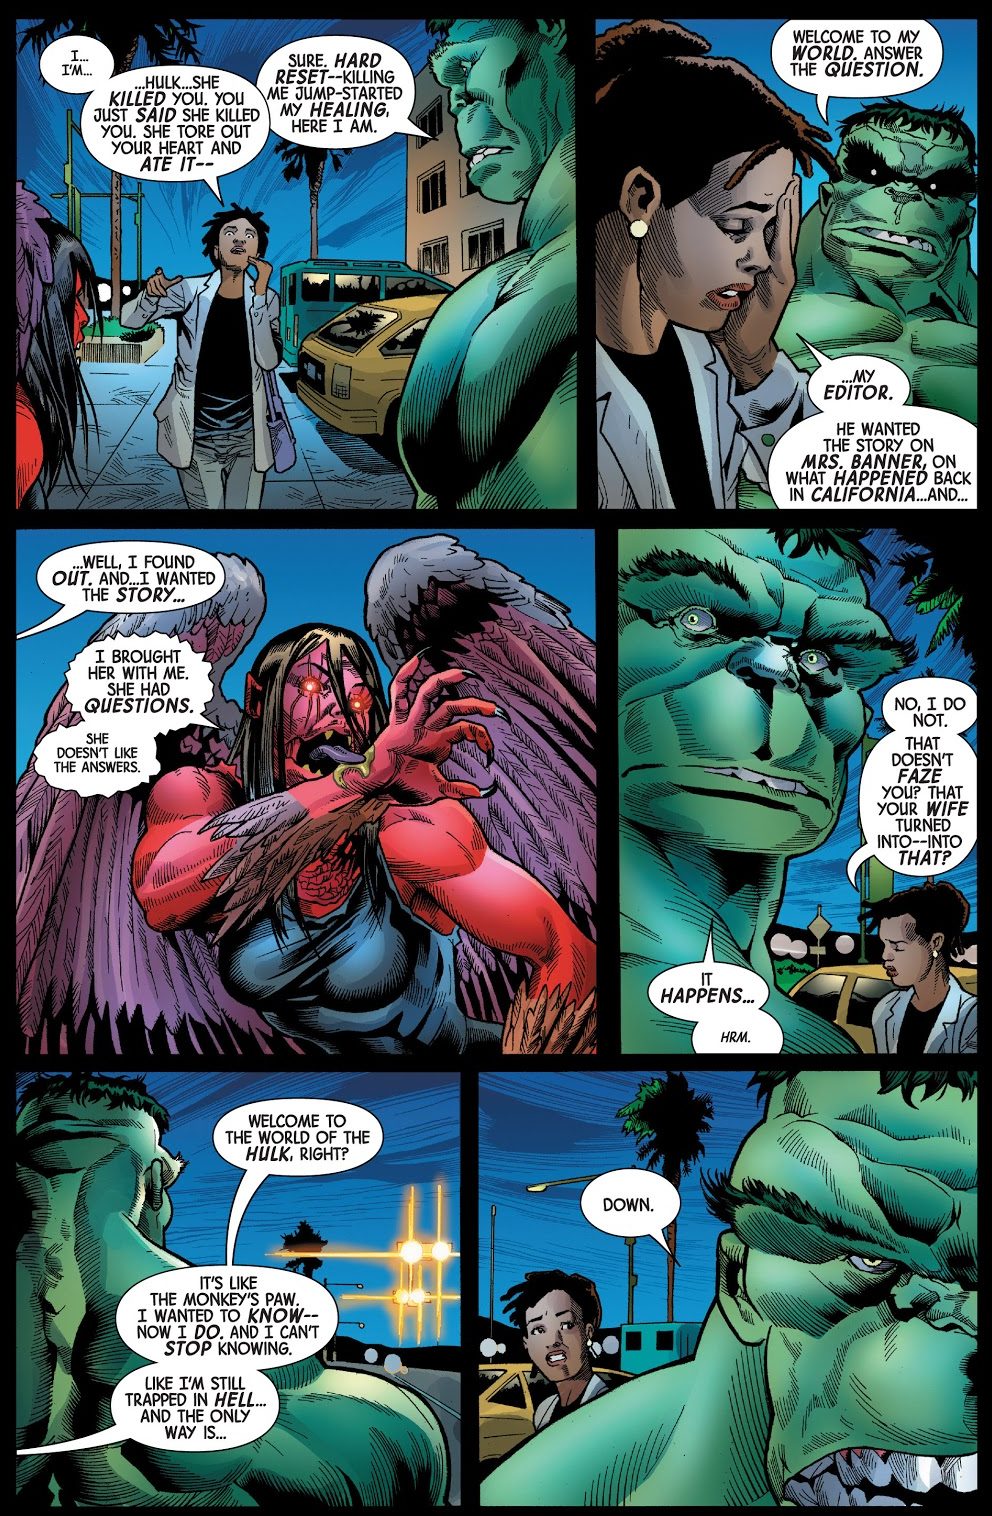 The Hulk And The Harpy VS The Abomination